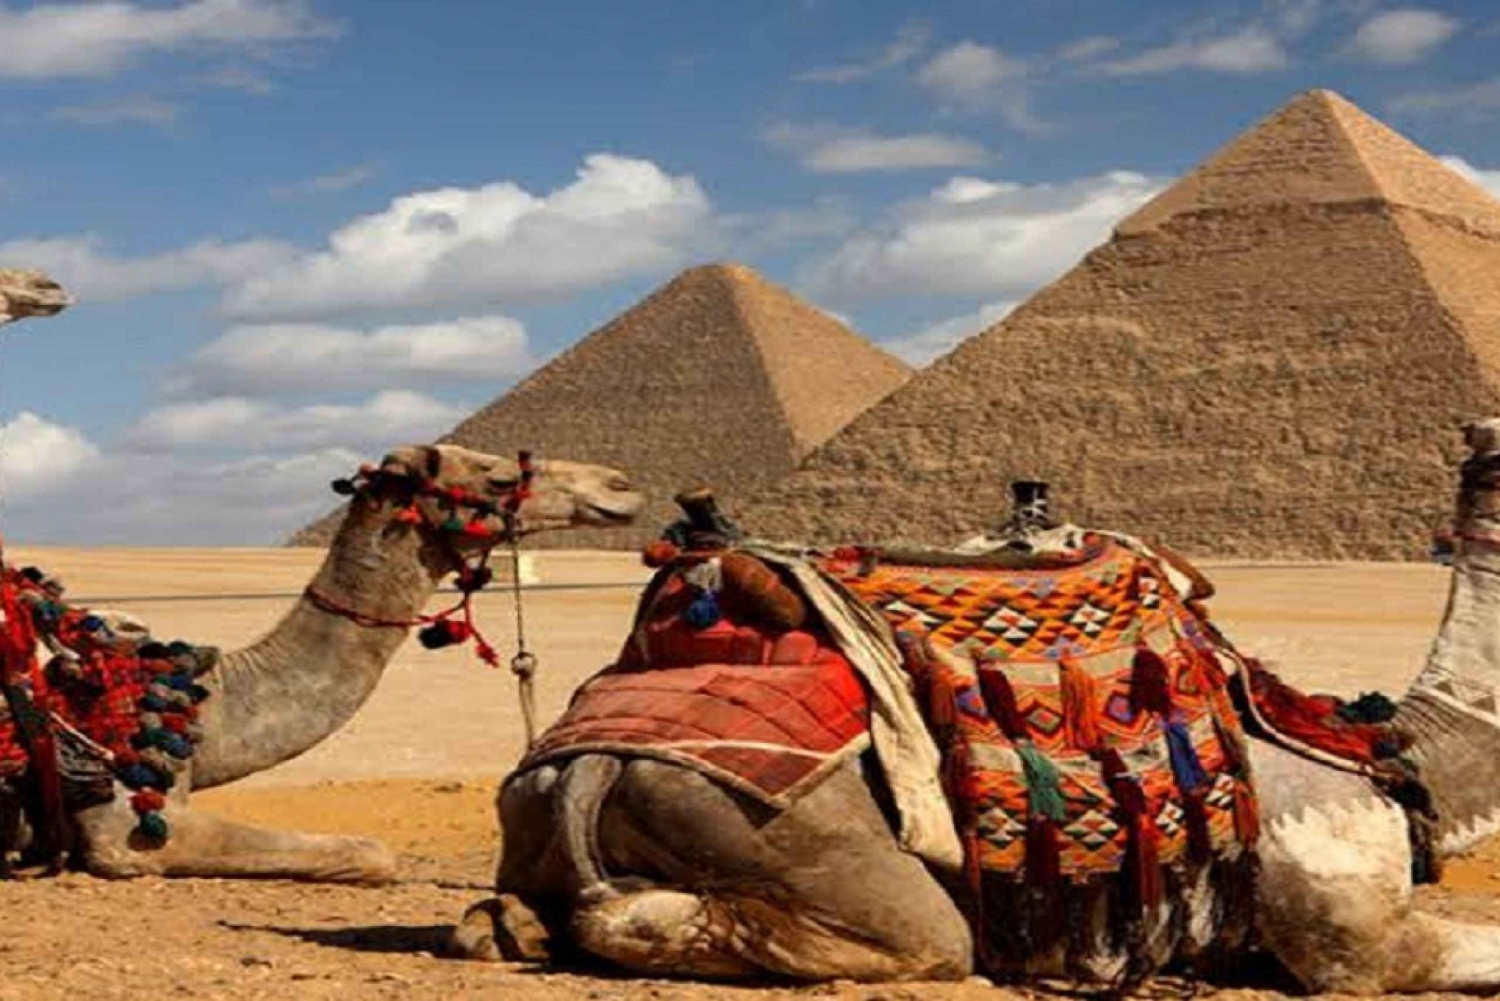 Cairo: private Giza Pyramids Tour with Camel Ride & Tickets